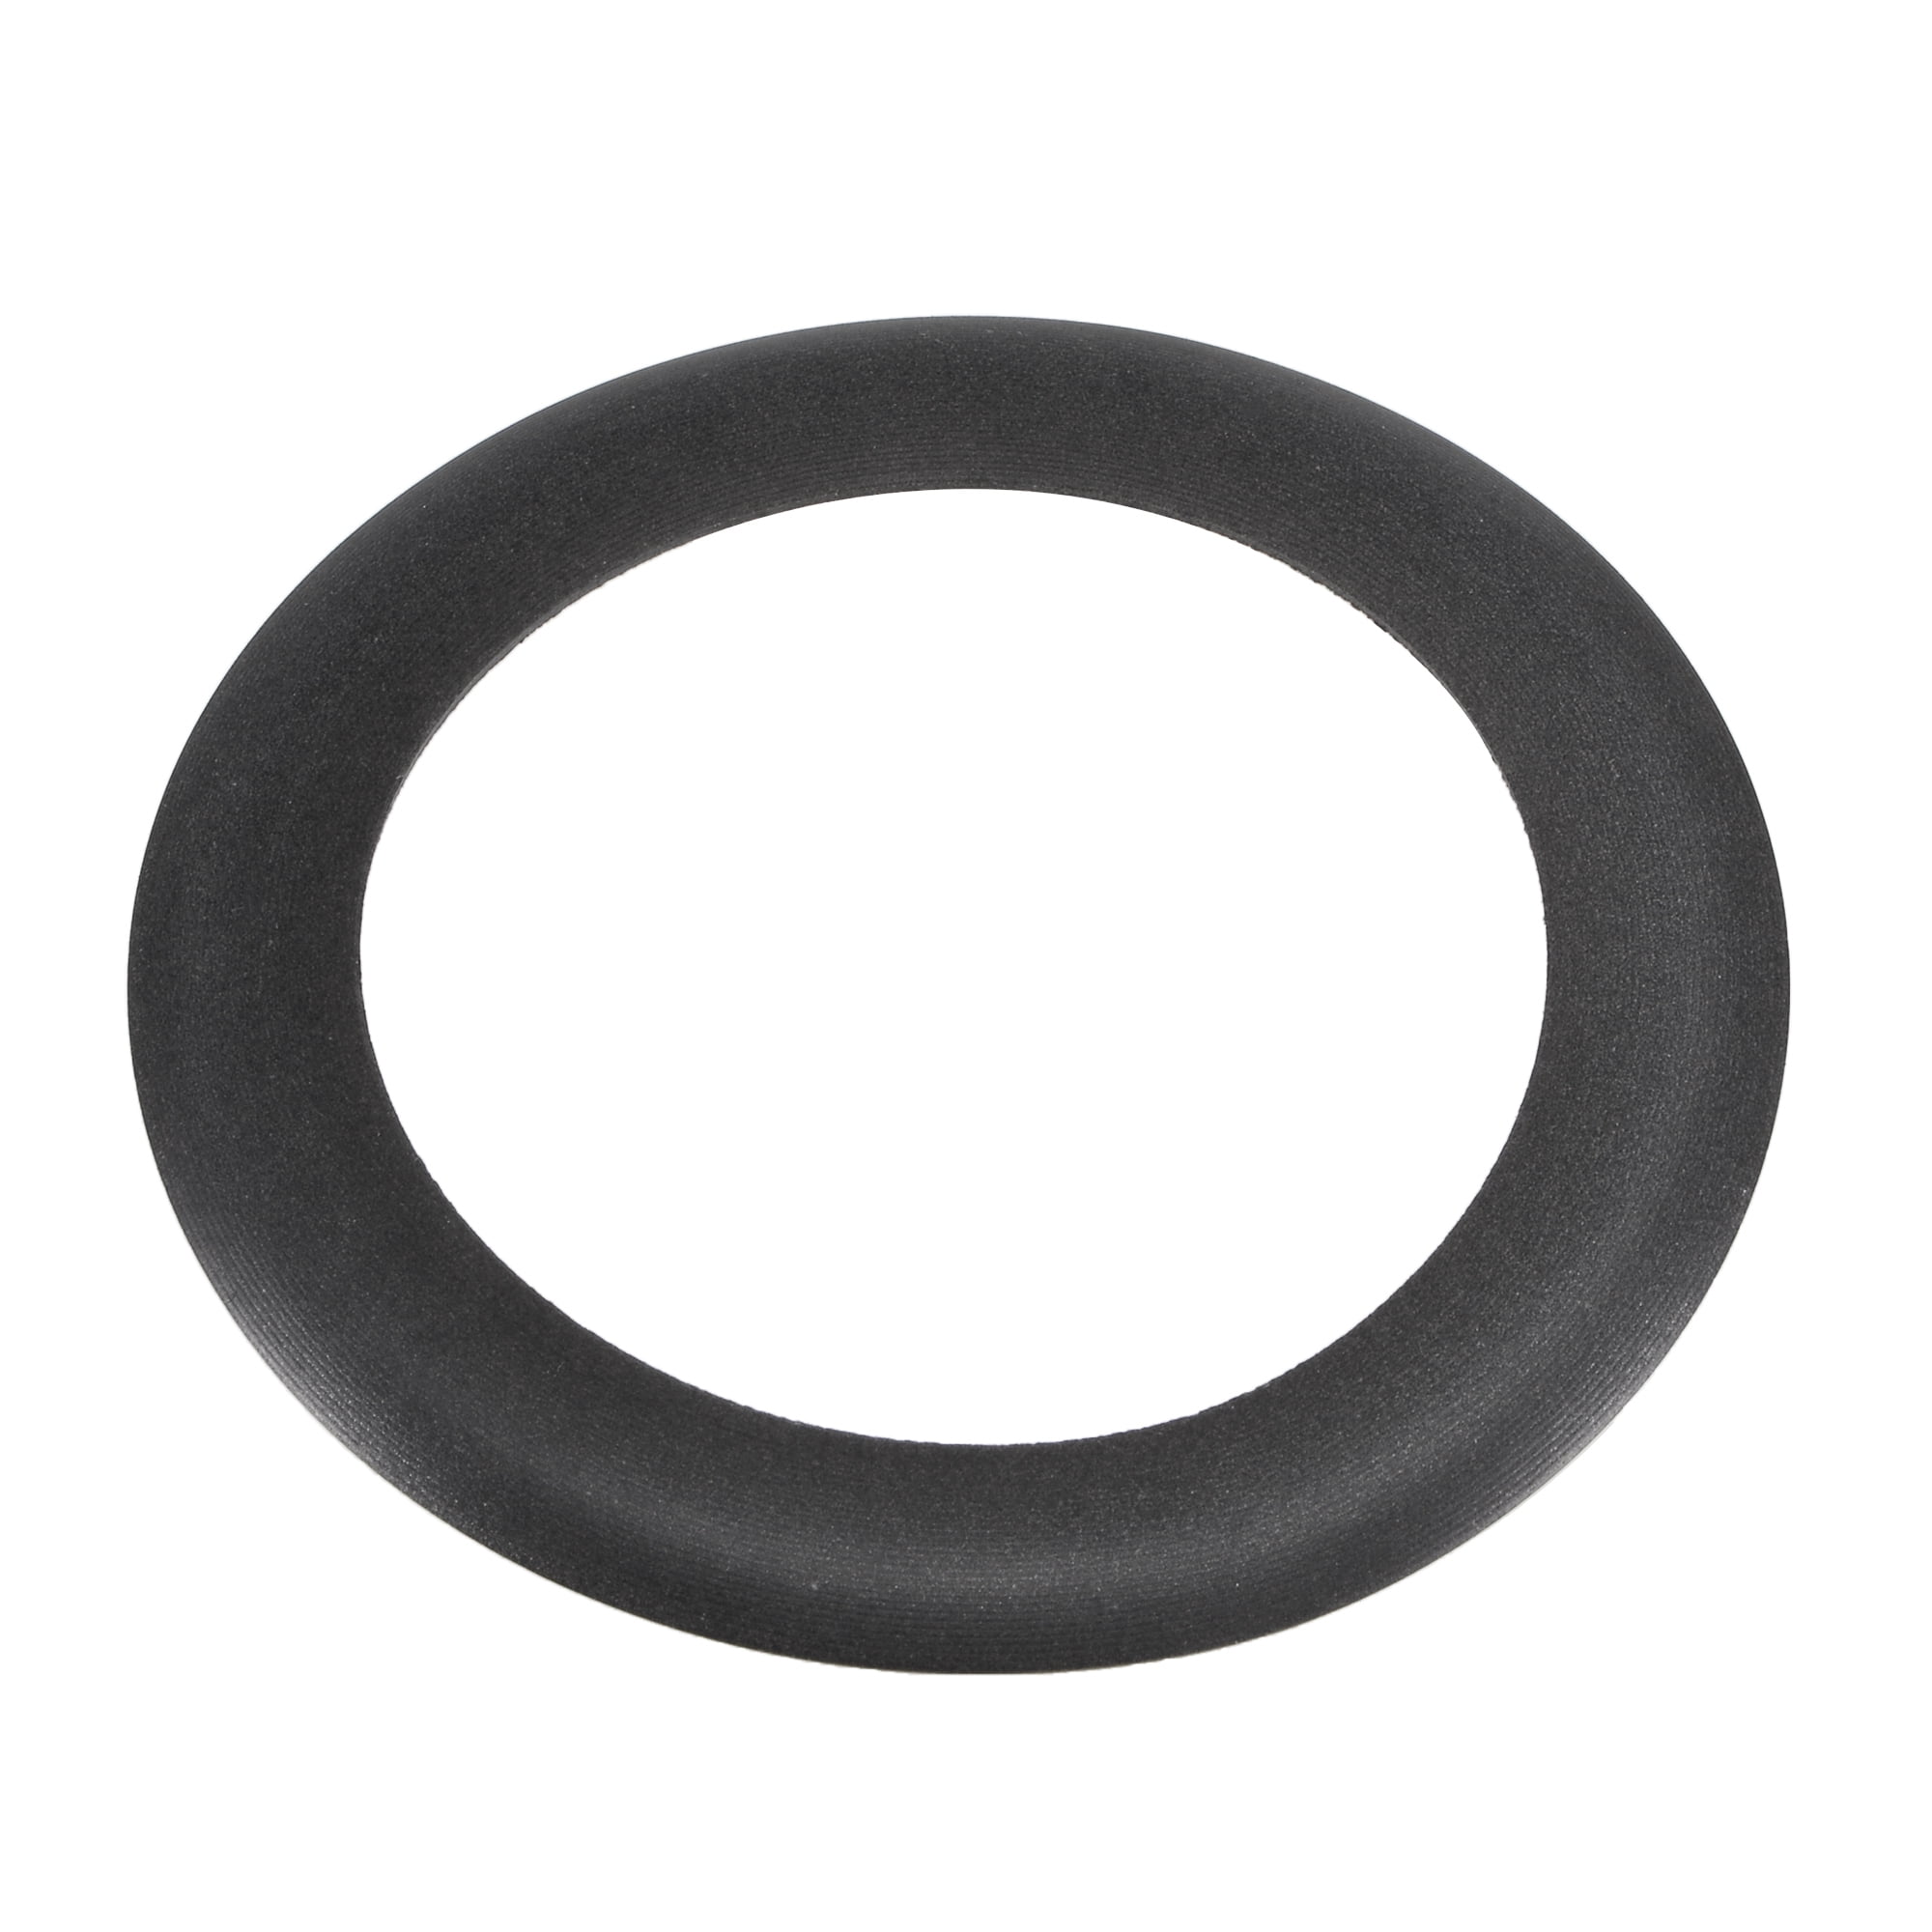 uxcell Air Compressor Compression Piston Ring Replacement Part 67.4mm OD 48mm ID 0.8mm Thickness Dark Gray